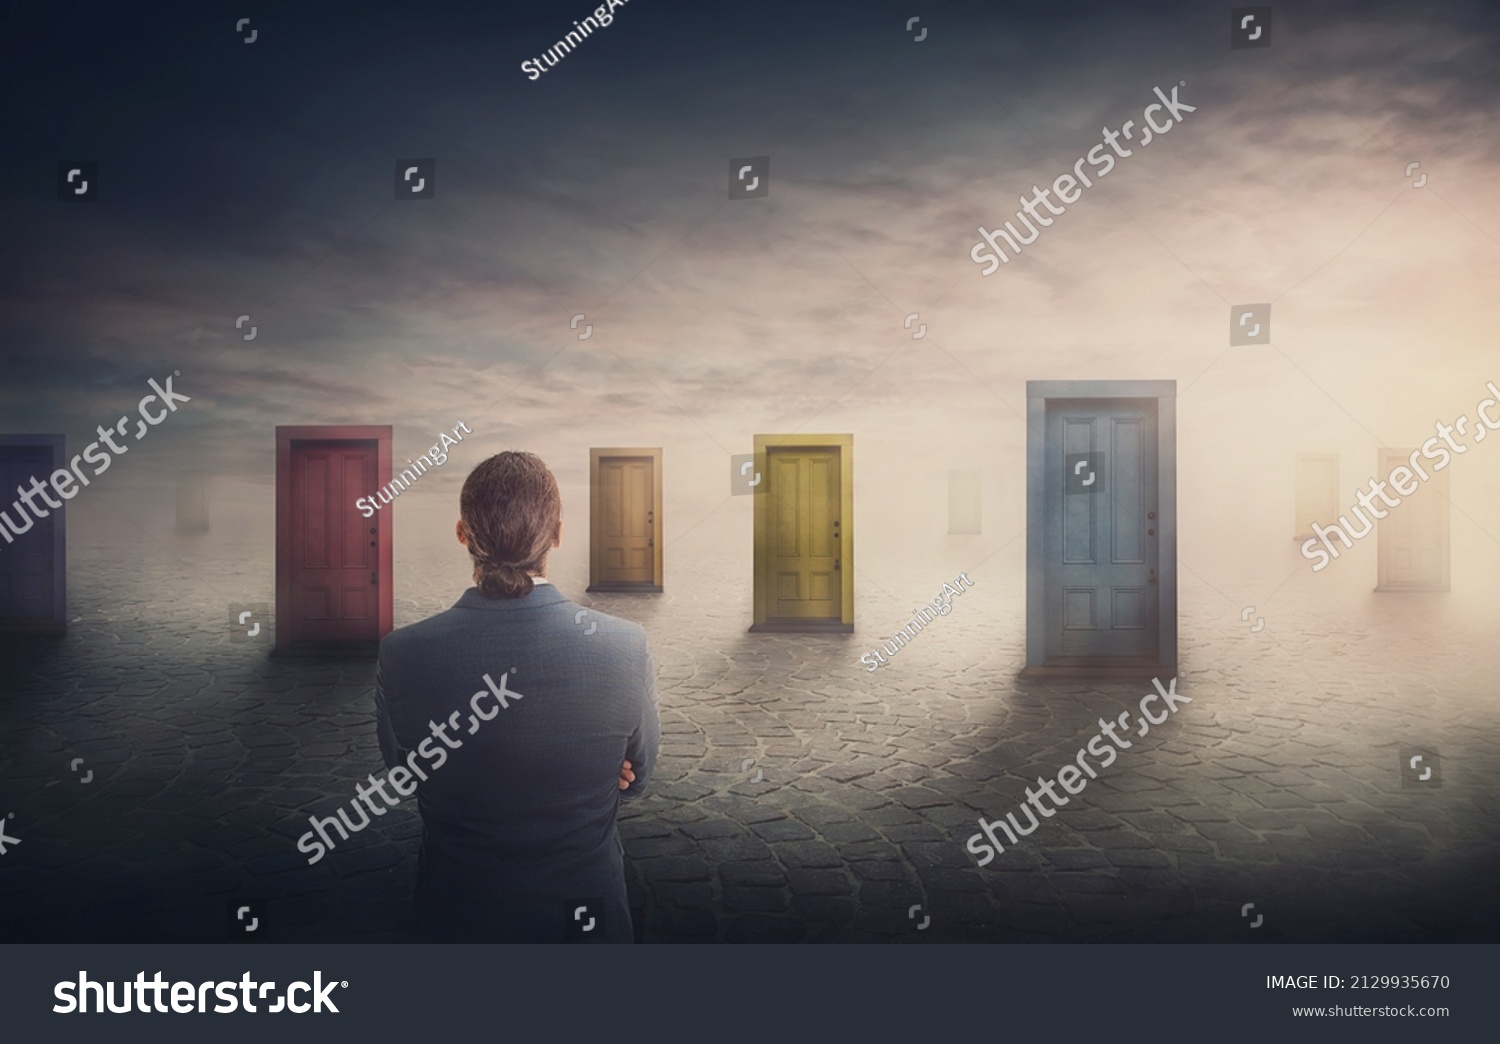 Doubtful businessman in front of multiple doors of diverse colors as symbol for different opportunities. Business challenge, choosing a correct doorway. Difficult decision concept, failure or success #2129935670